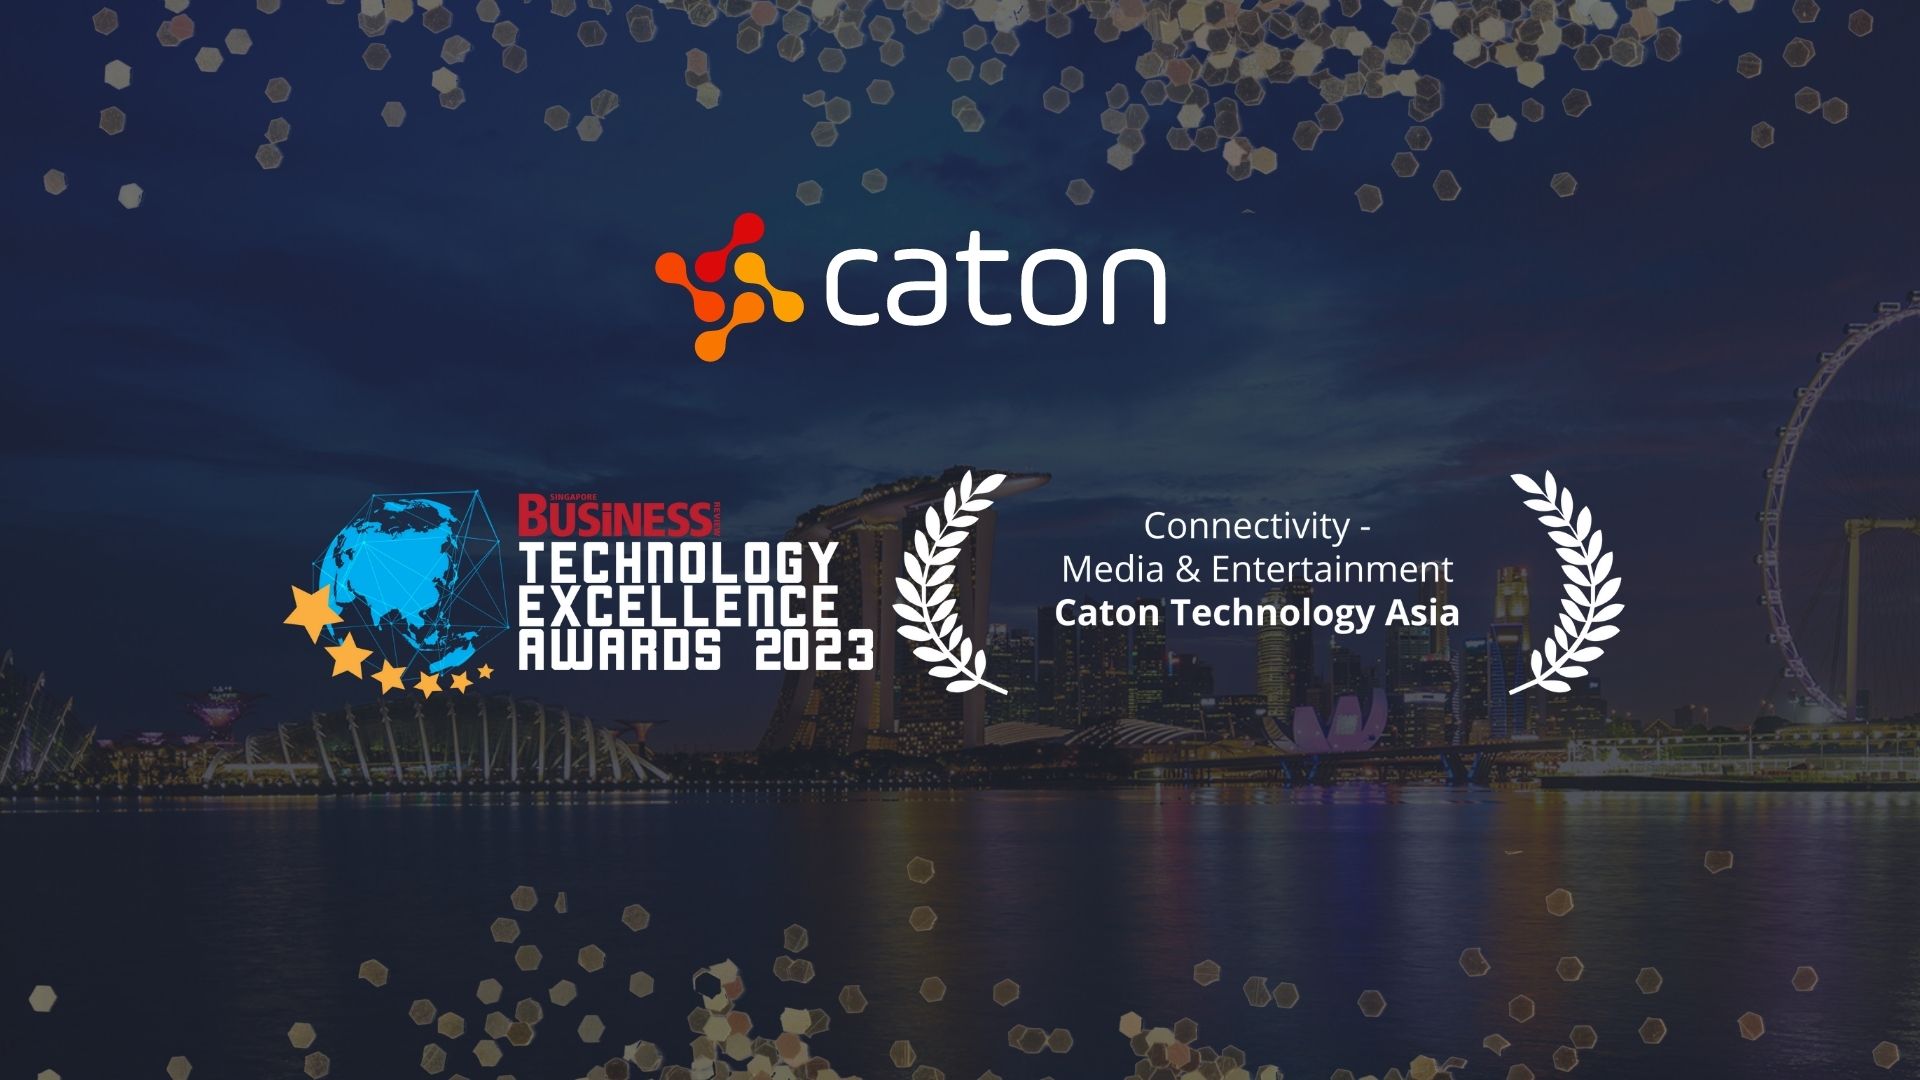 Caton Technology honoured with Connectivity - Media & Entertainment Award